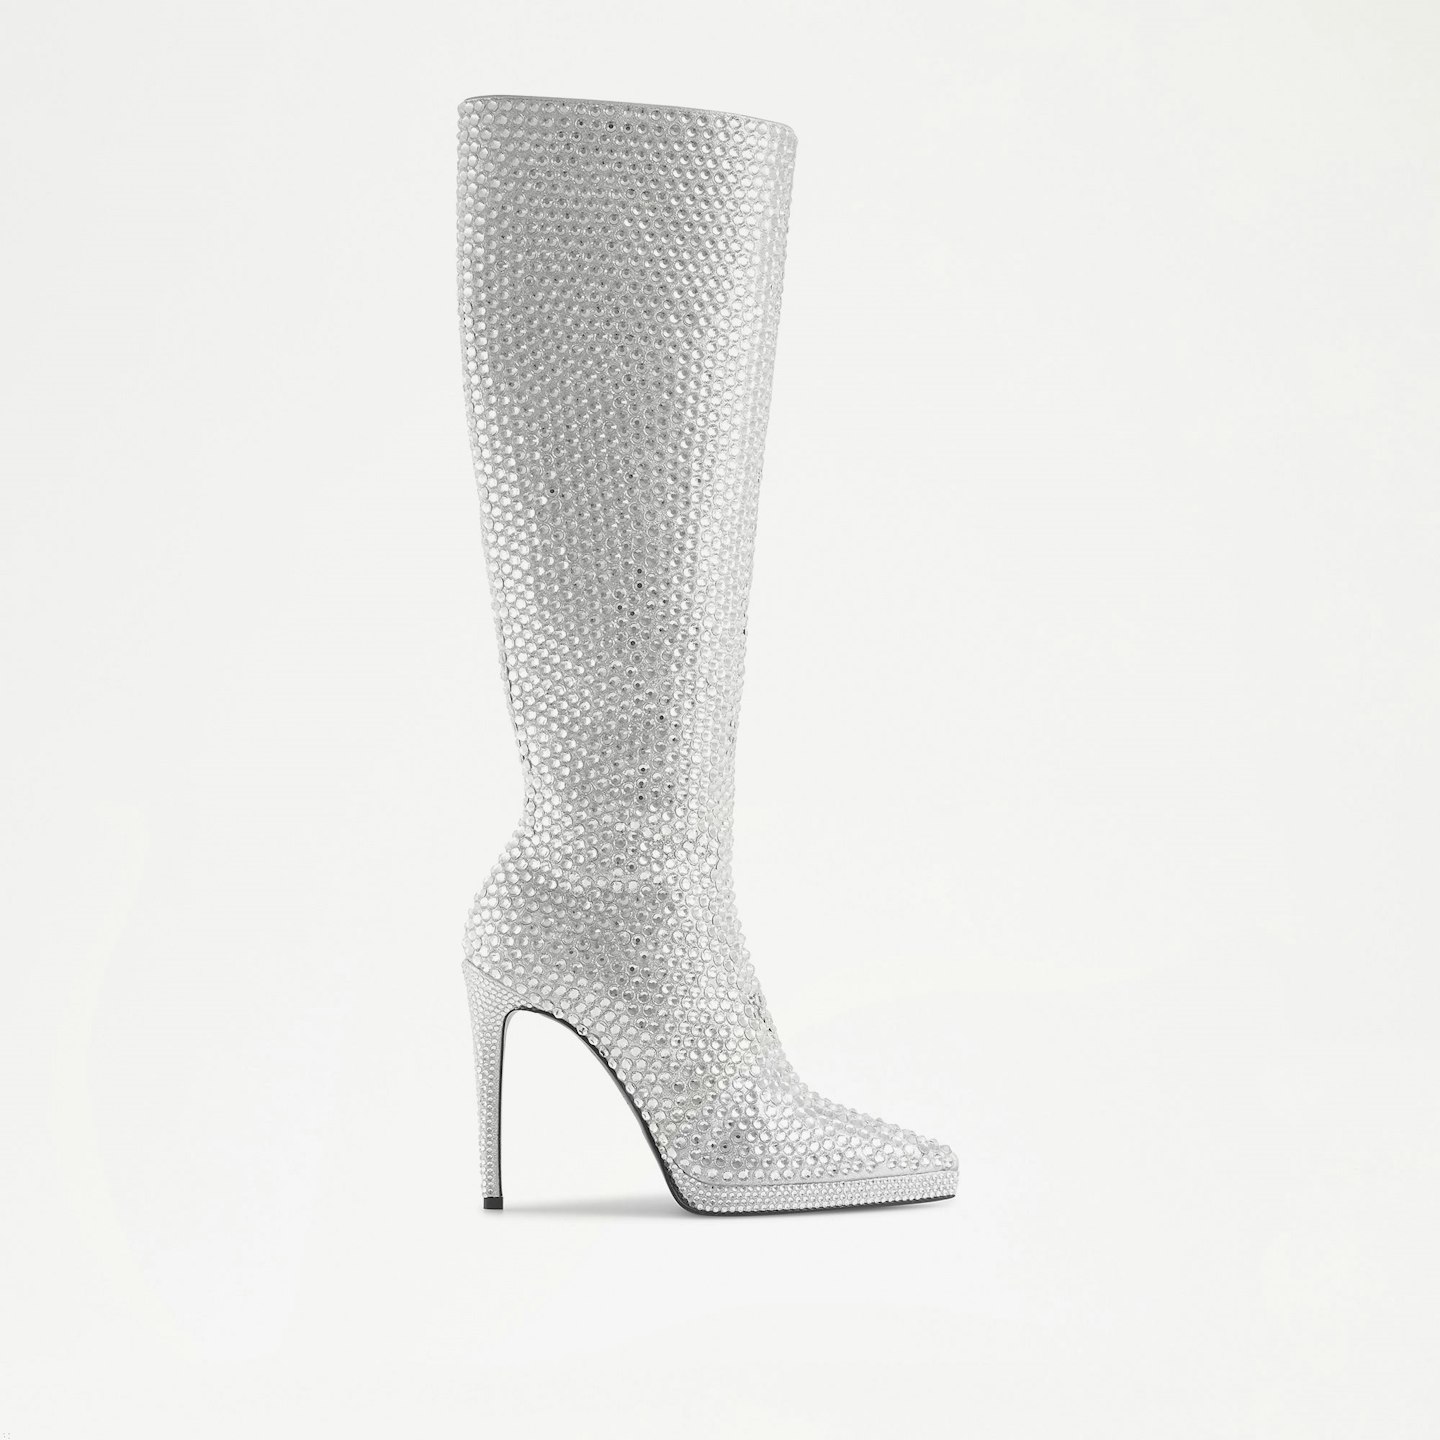 Russell & Bromley, Crystal Knee-High Boots